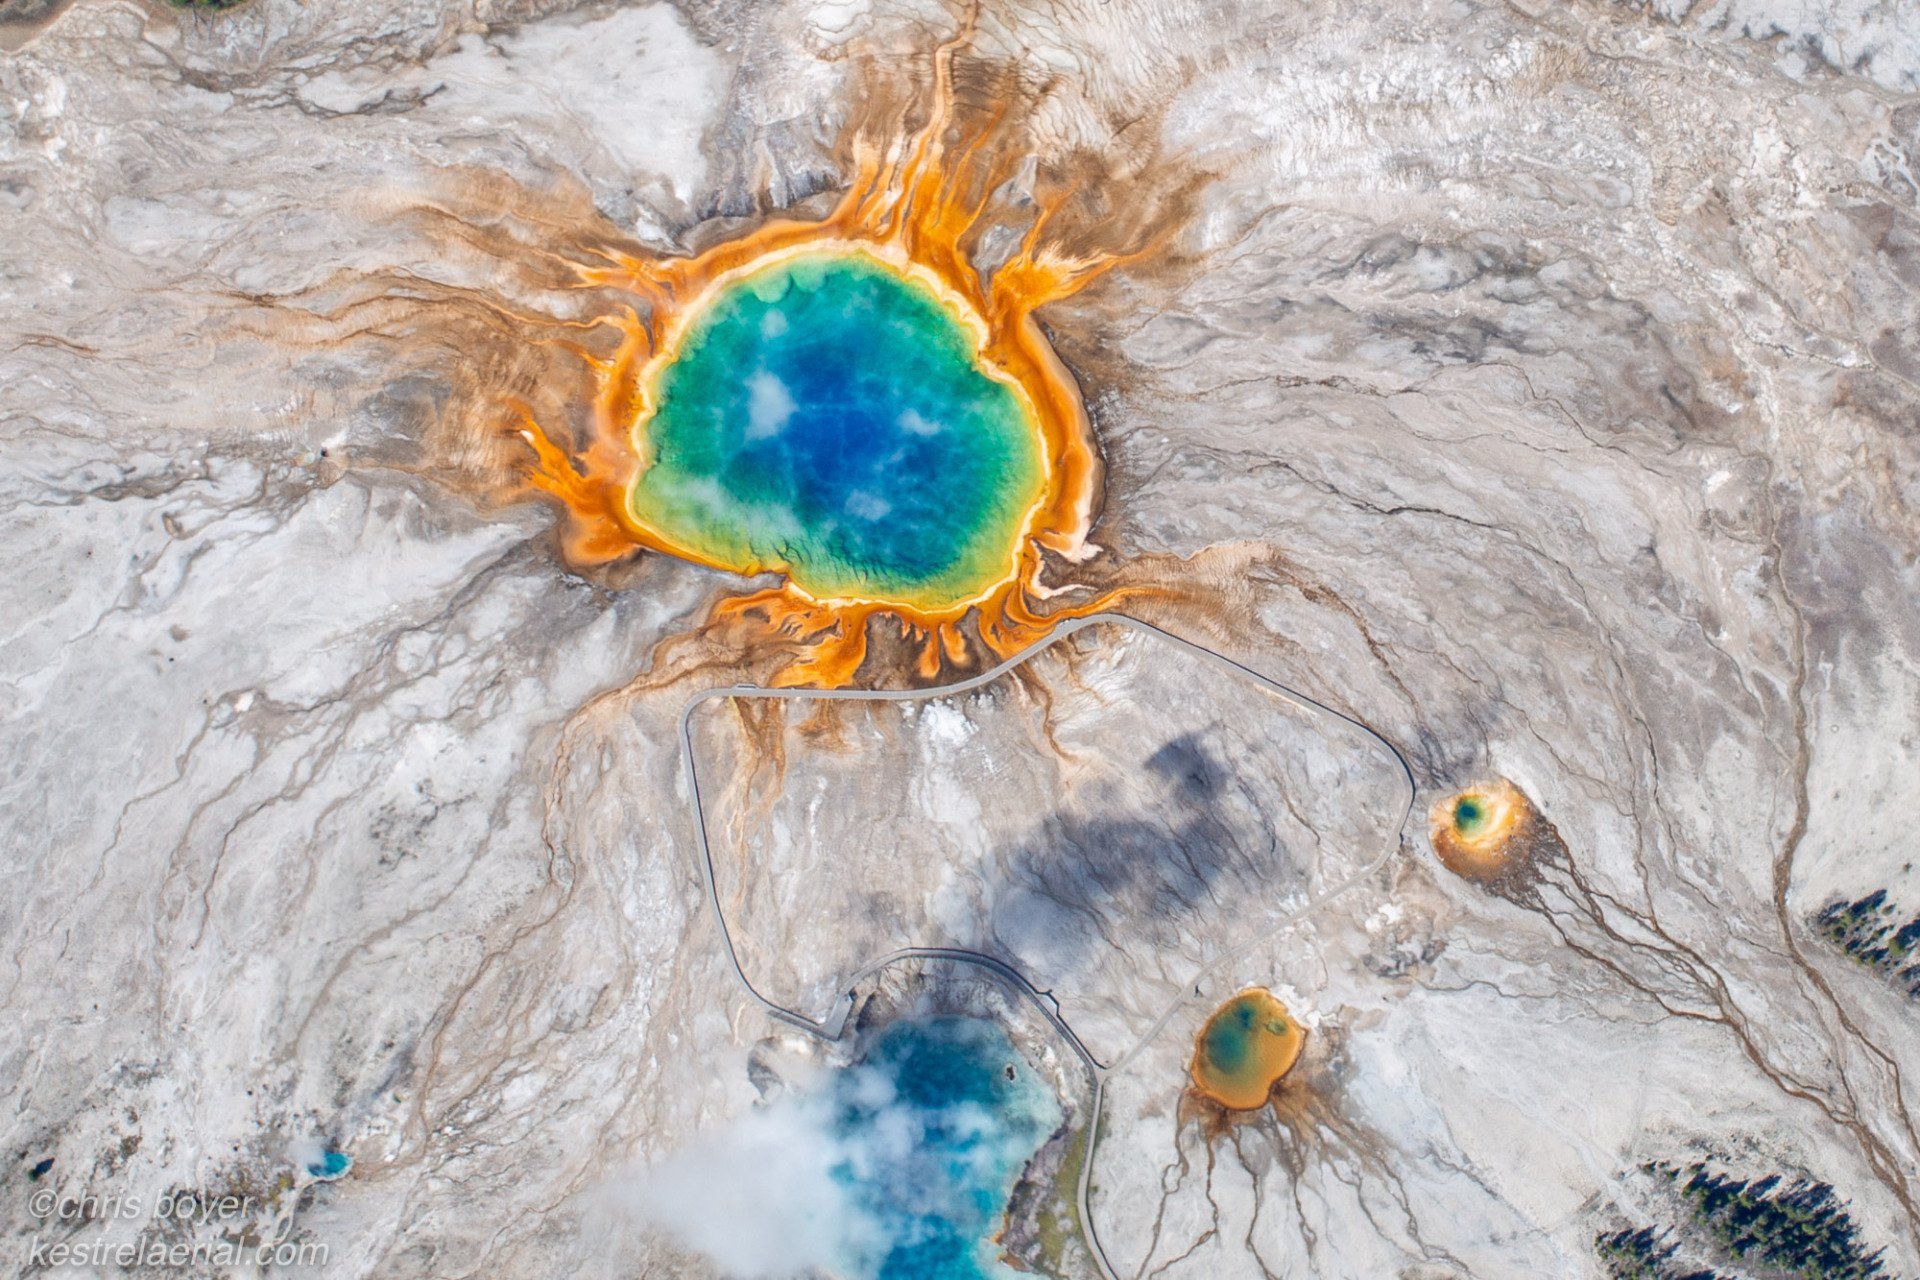 Grand Prismatic Spring #2, Yellowstone National Park, Wyoming